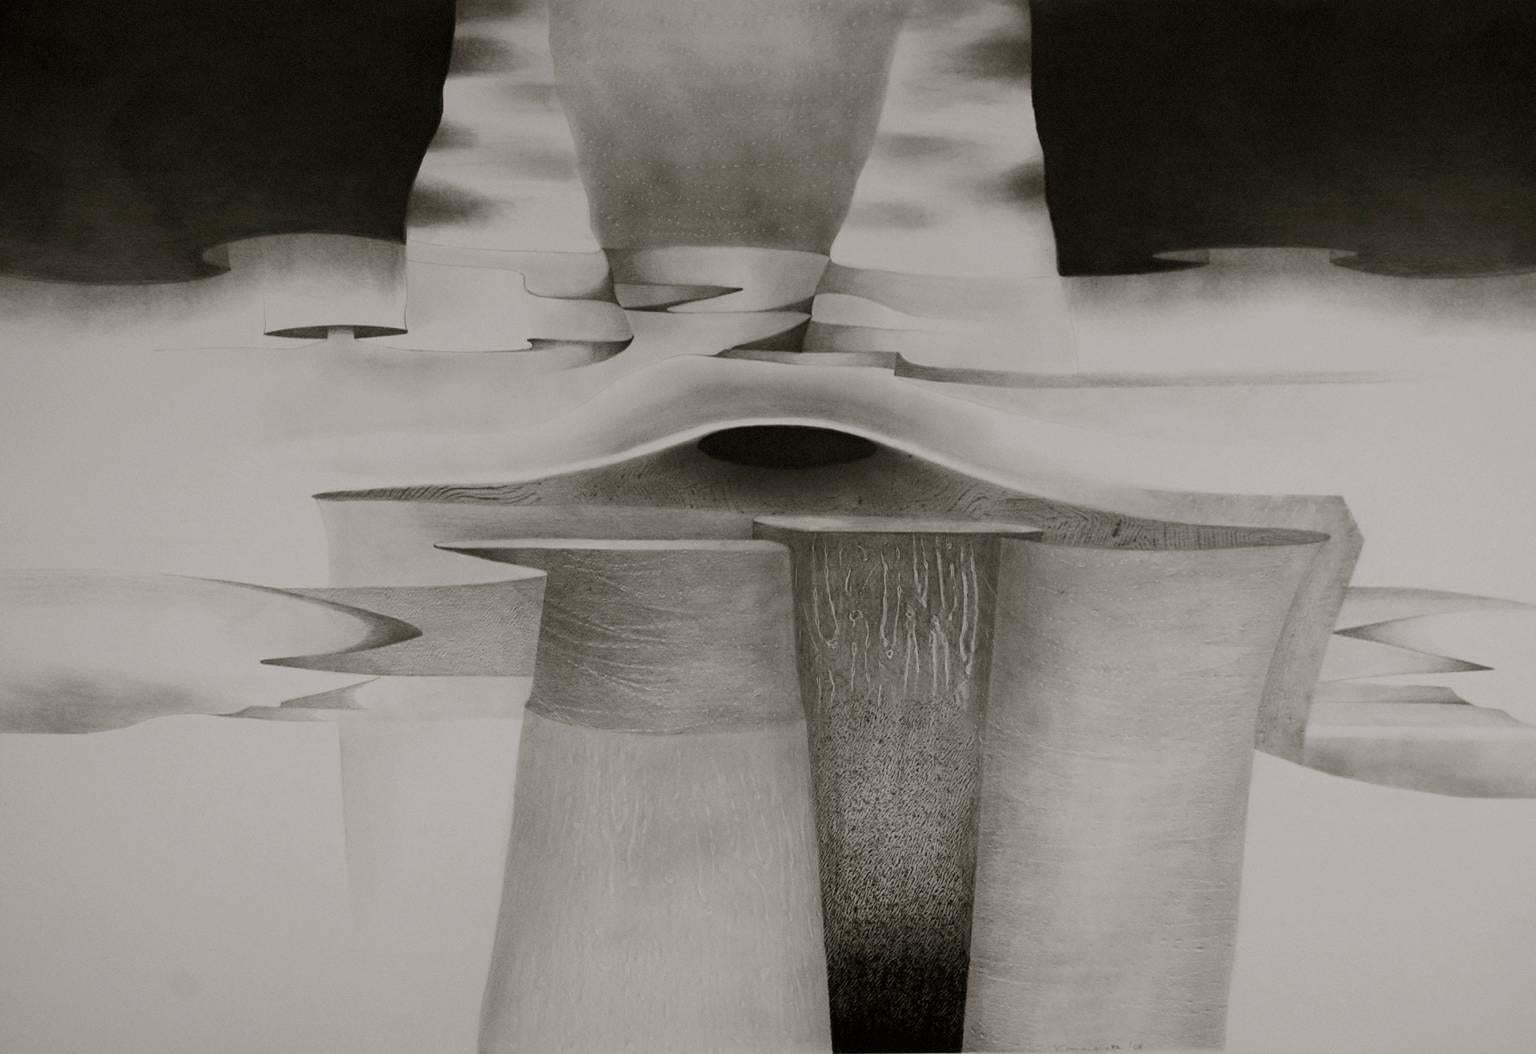 Kathleen Cammarata Abstract Drawing - "Excursion 5" - Black & White abstract drawing (pencil and charcoal on paper).